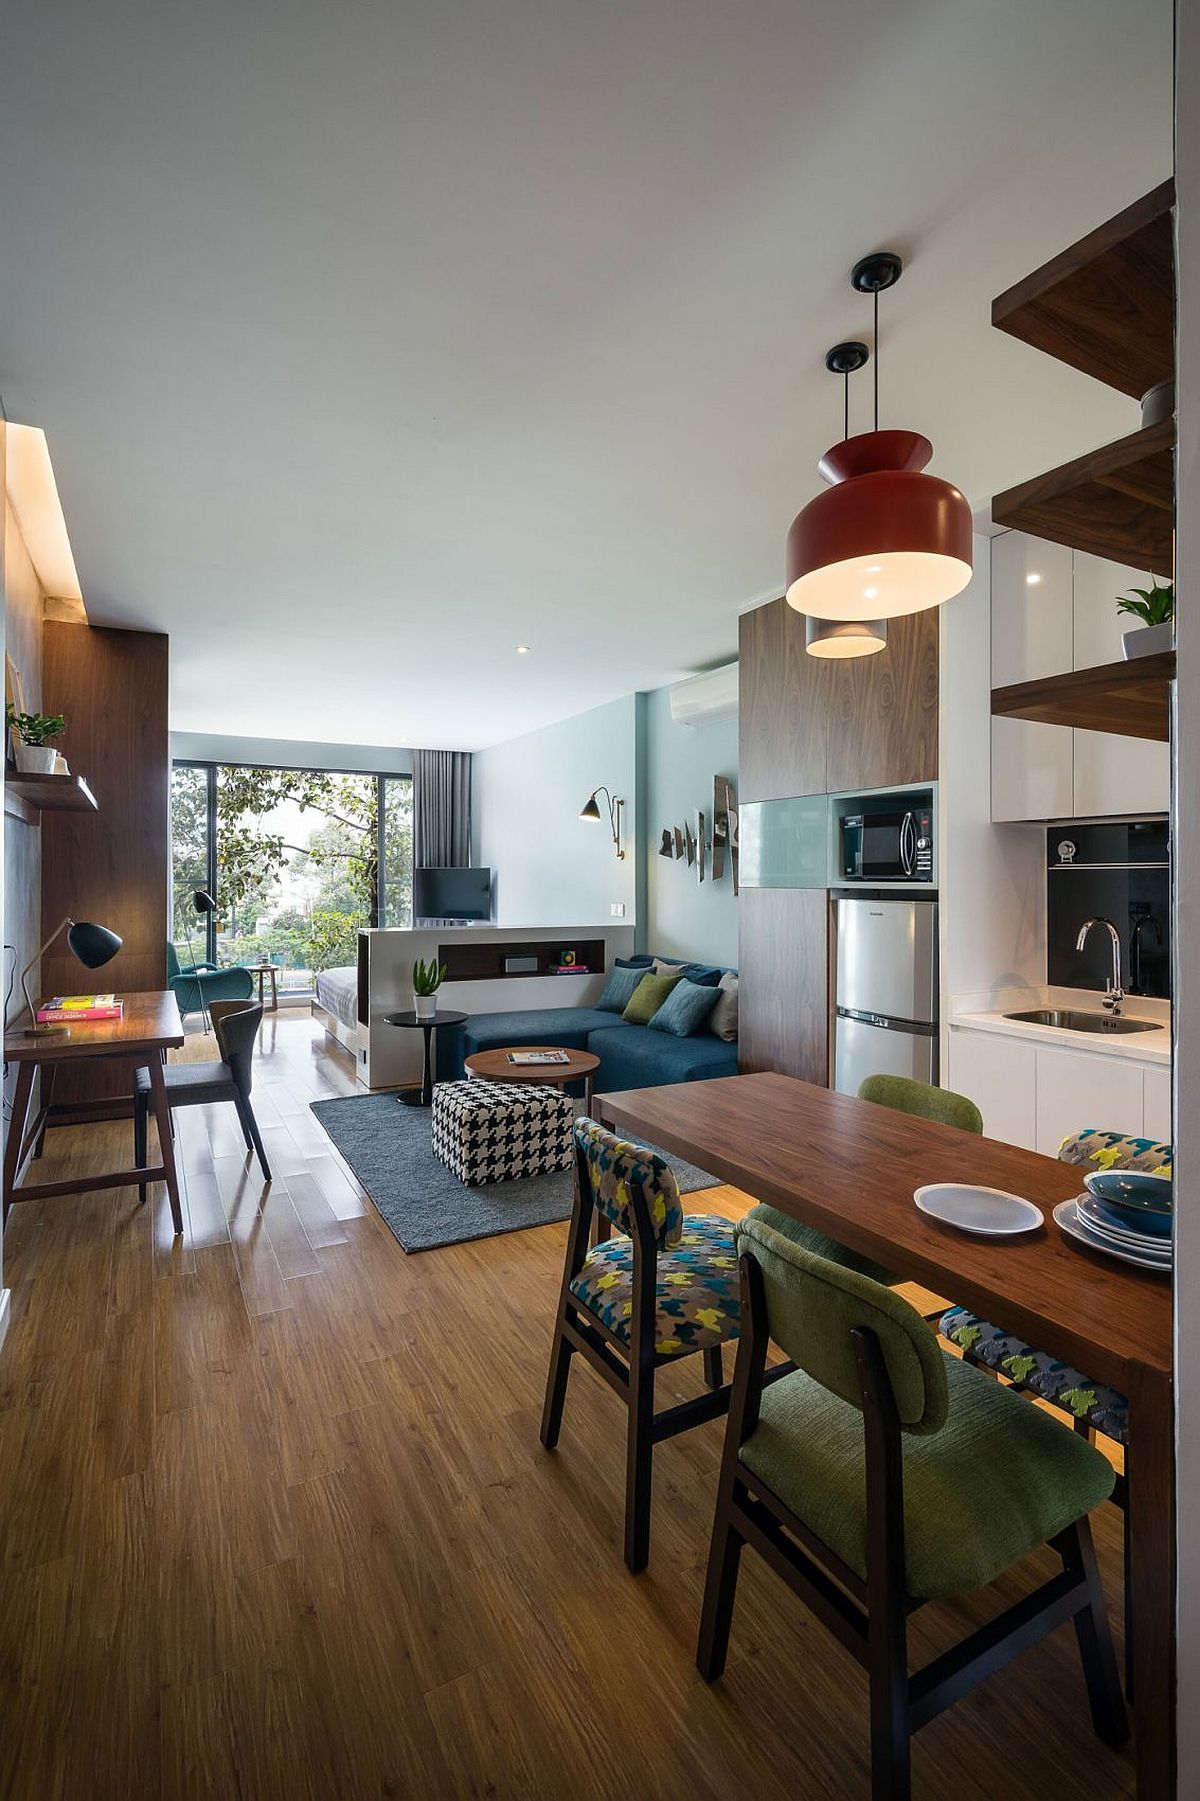 Open living area, kitchen and dining with a small sectional couch in blue and workdesk